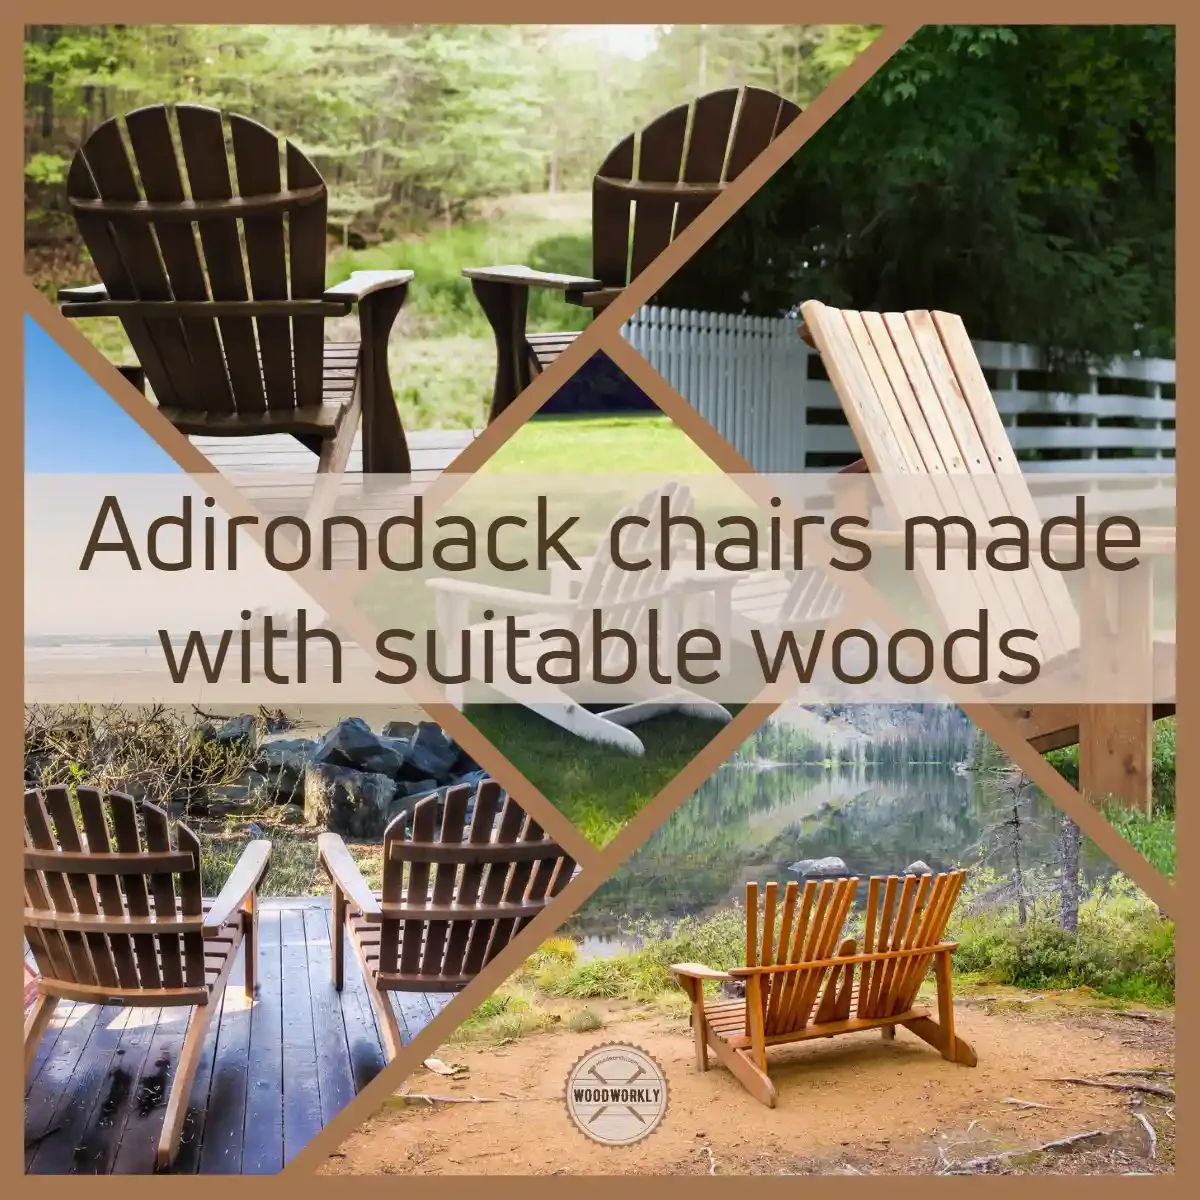 Adirondack chairs made with suitable woods